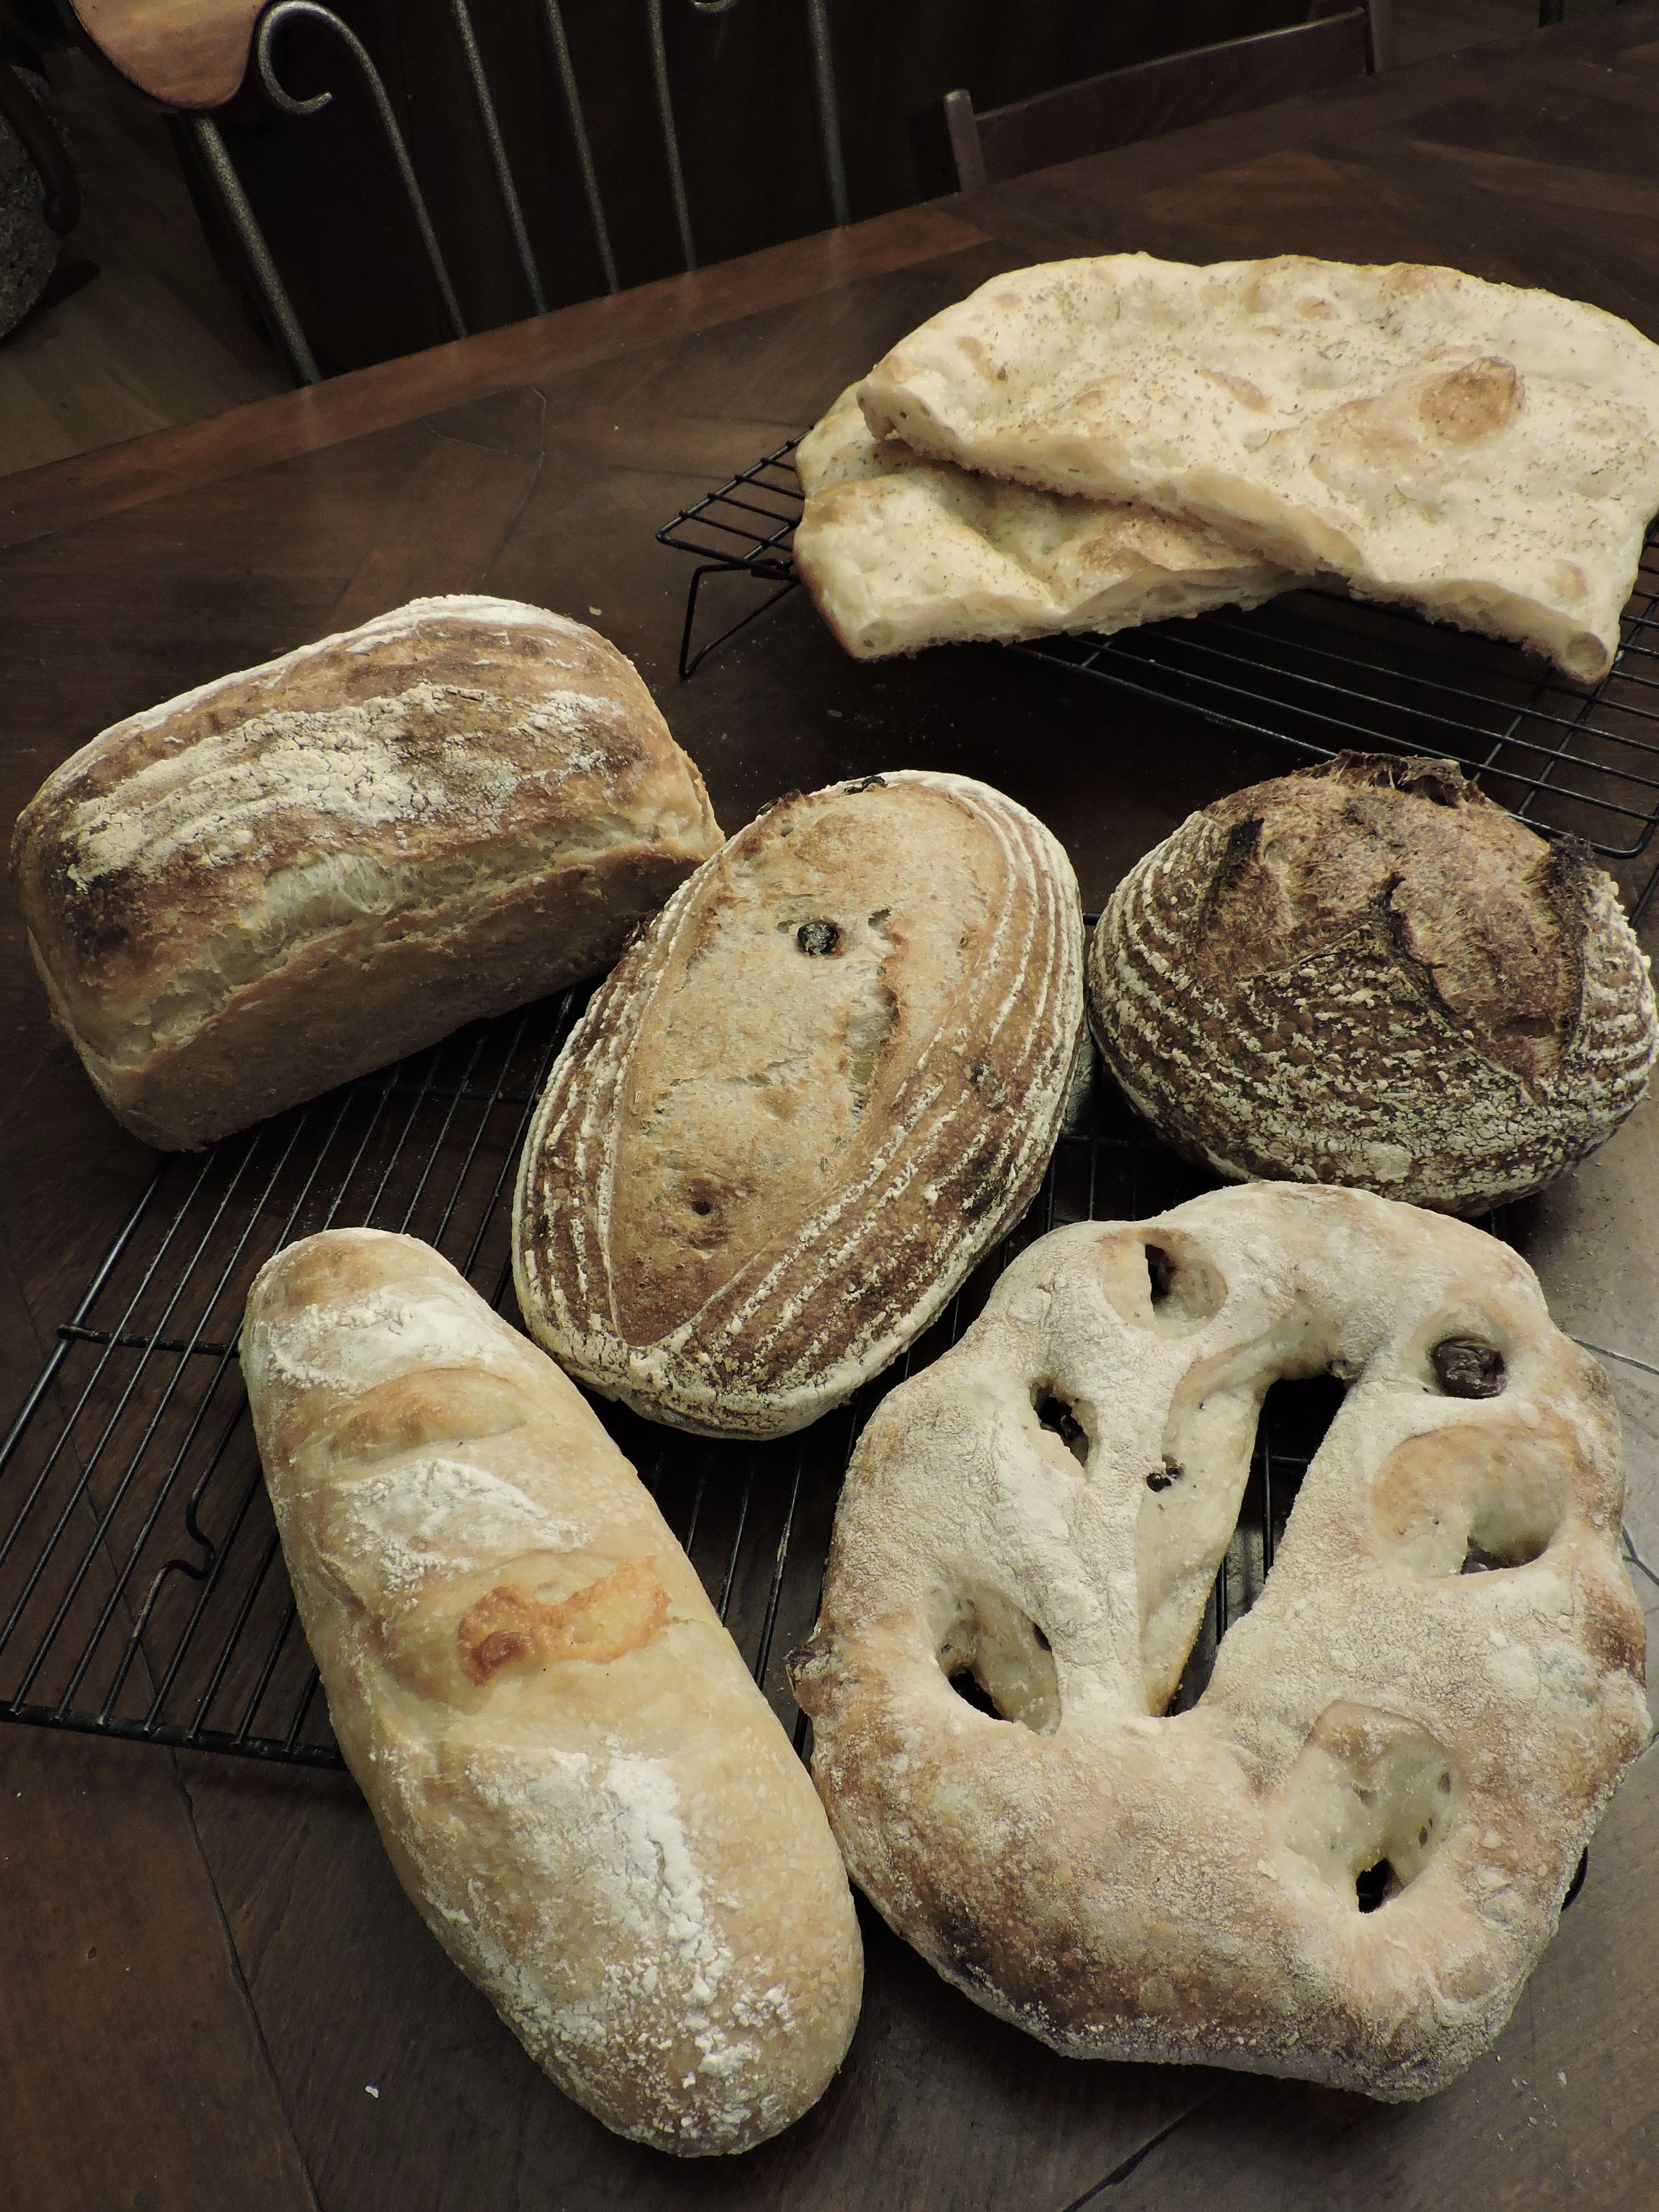  Rosemary focaccia (far back), then standard sourdough sandwich (middle far left), golden raisin fennel (middle), stout sourdough (middle far right), Dubliner cheddar batard (front left), and olive fougasse (front right). 